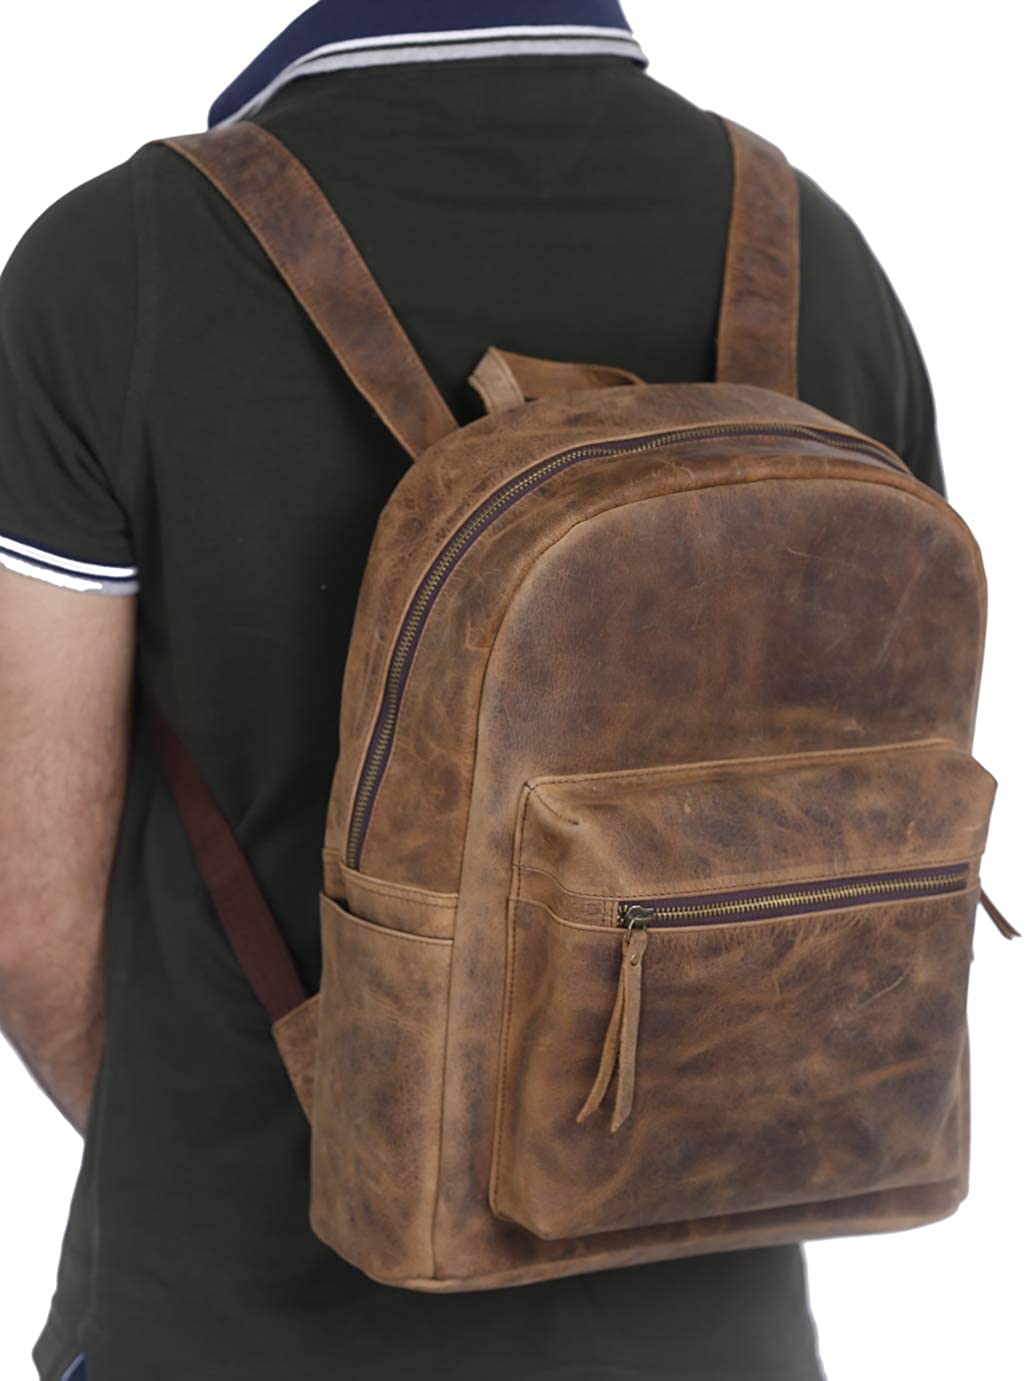 Premium Leather Laptop Bag for Men with Should Strap and 15.6 inch Laptop  Compartment